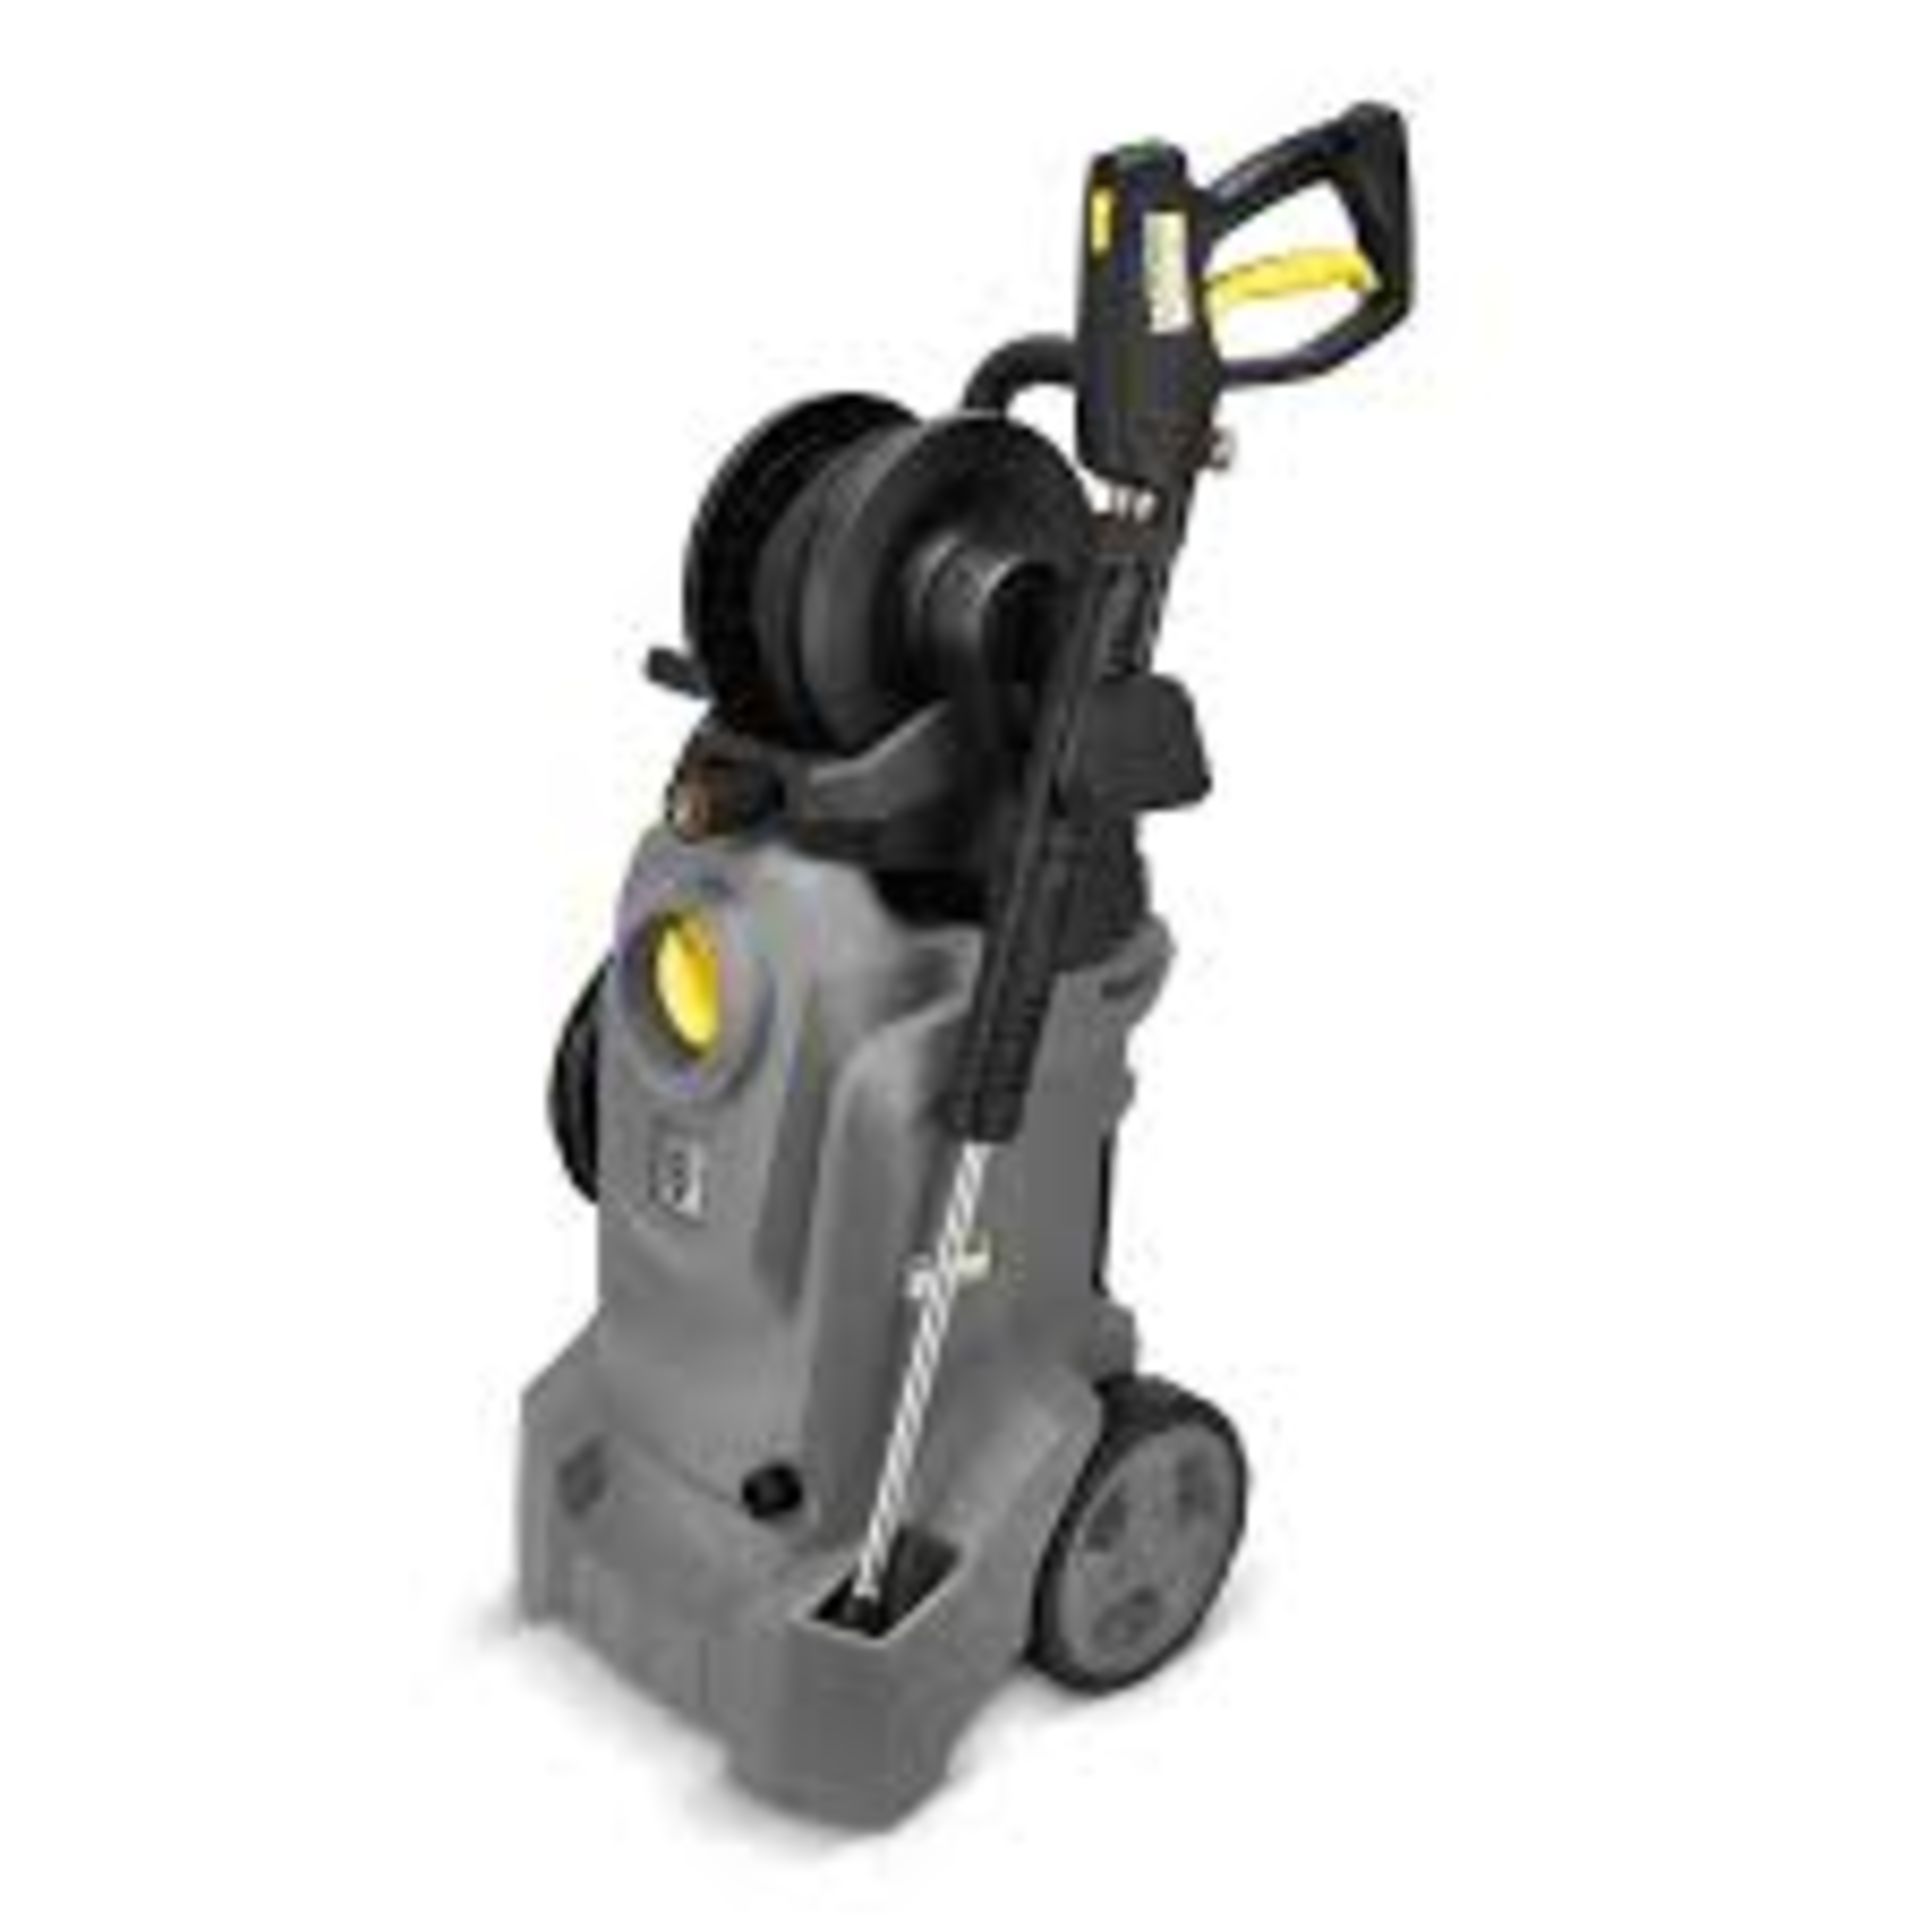 Karcher HD 4/10 x Classic Pressure Washer. - S2.7. Lightweight and compact, ergonomically designed